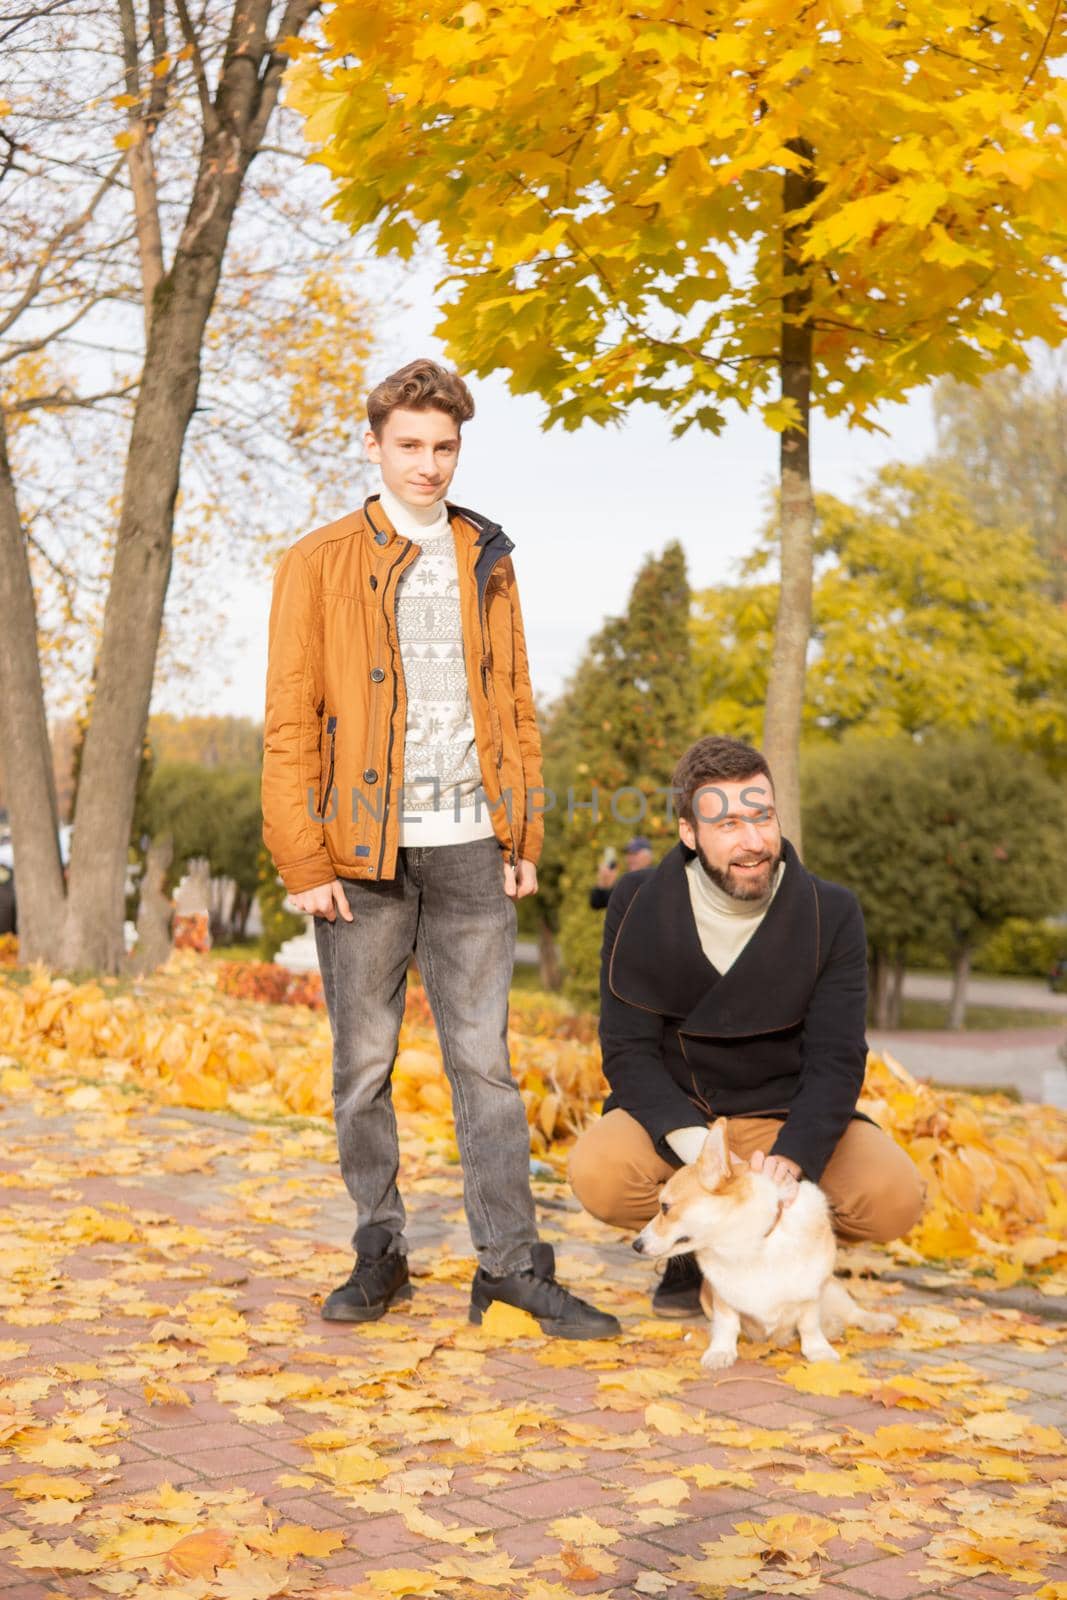 Father and son with a pet on a walk in the autumn park. by Annu1tochka